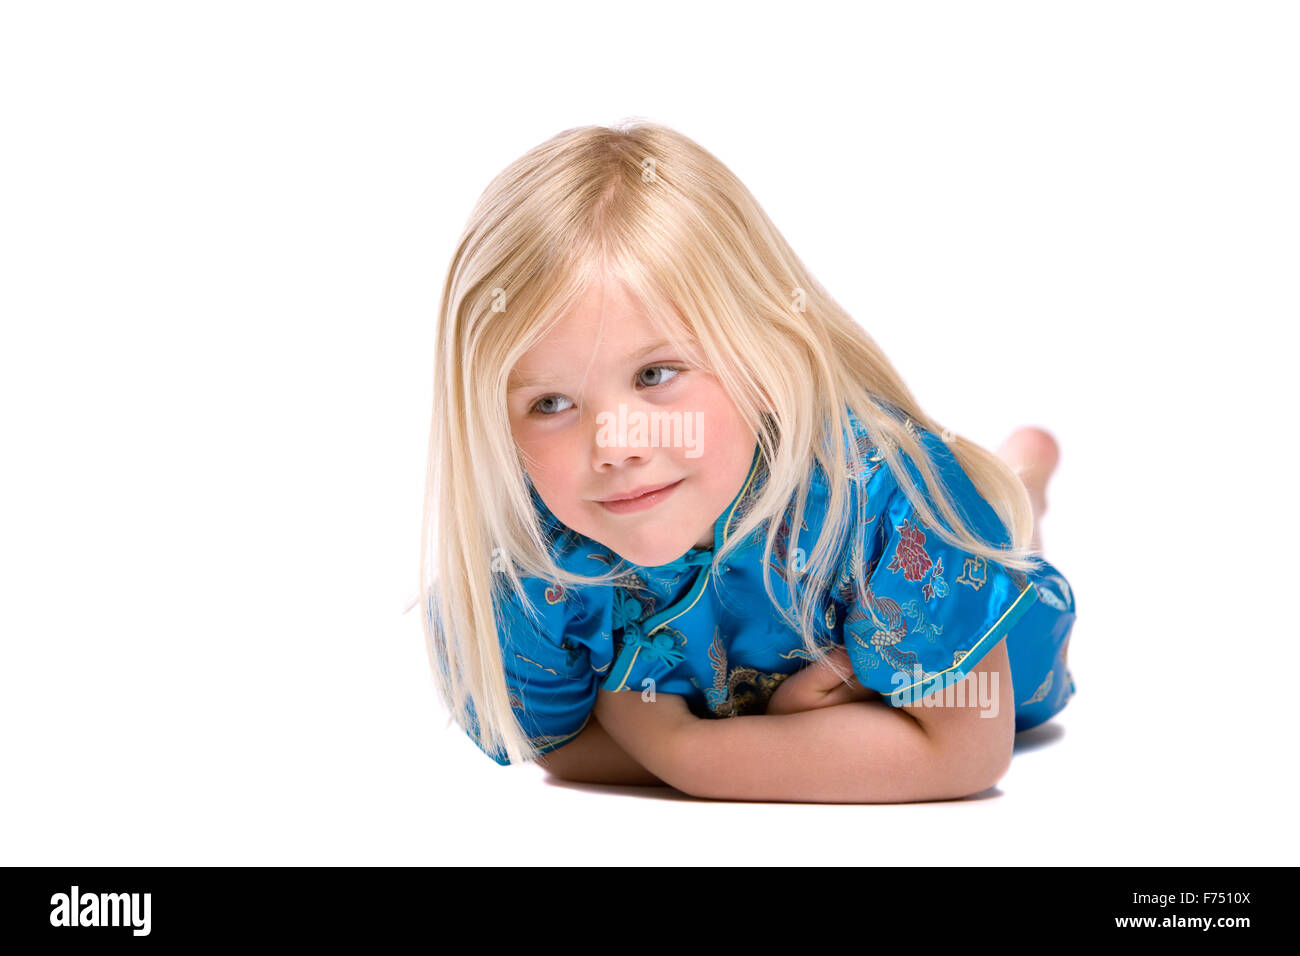 Four year old girl Stock Photo